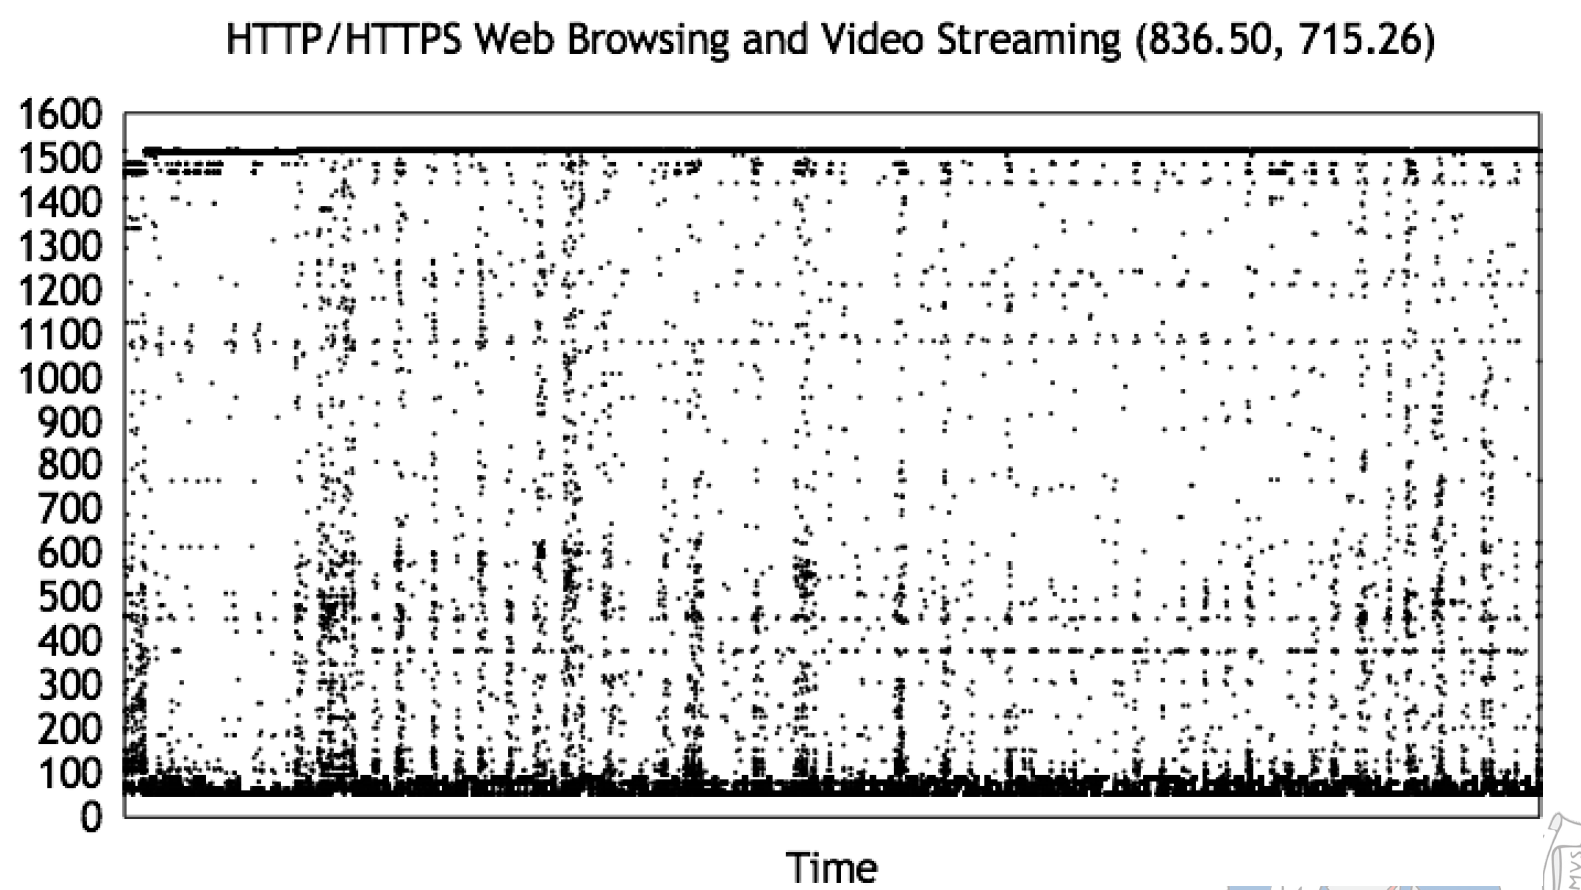 HTTP/HTTPS browsing and streaming